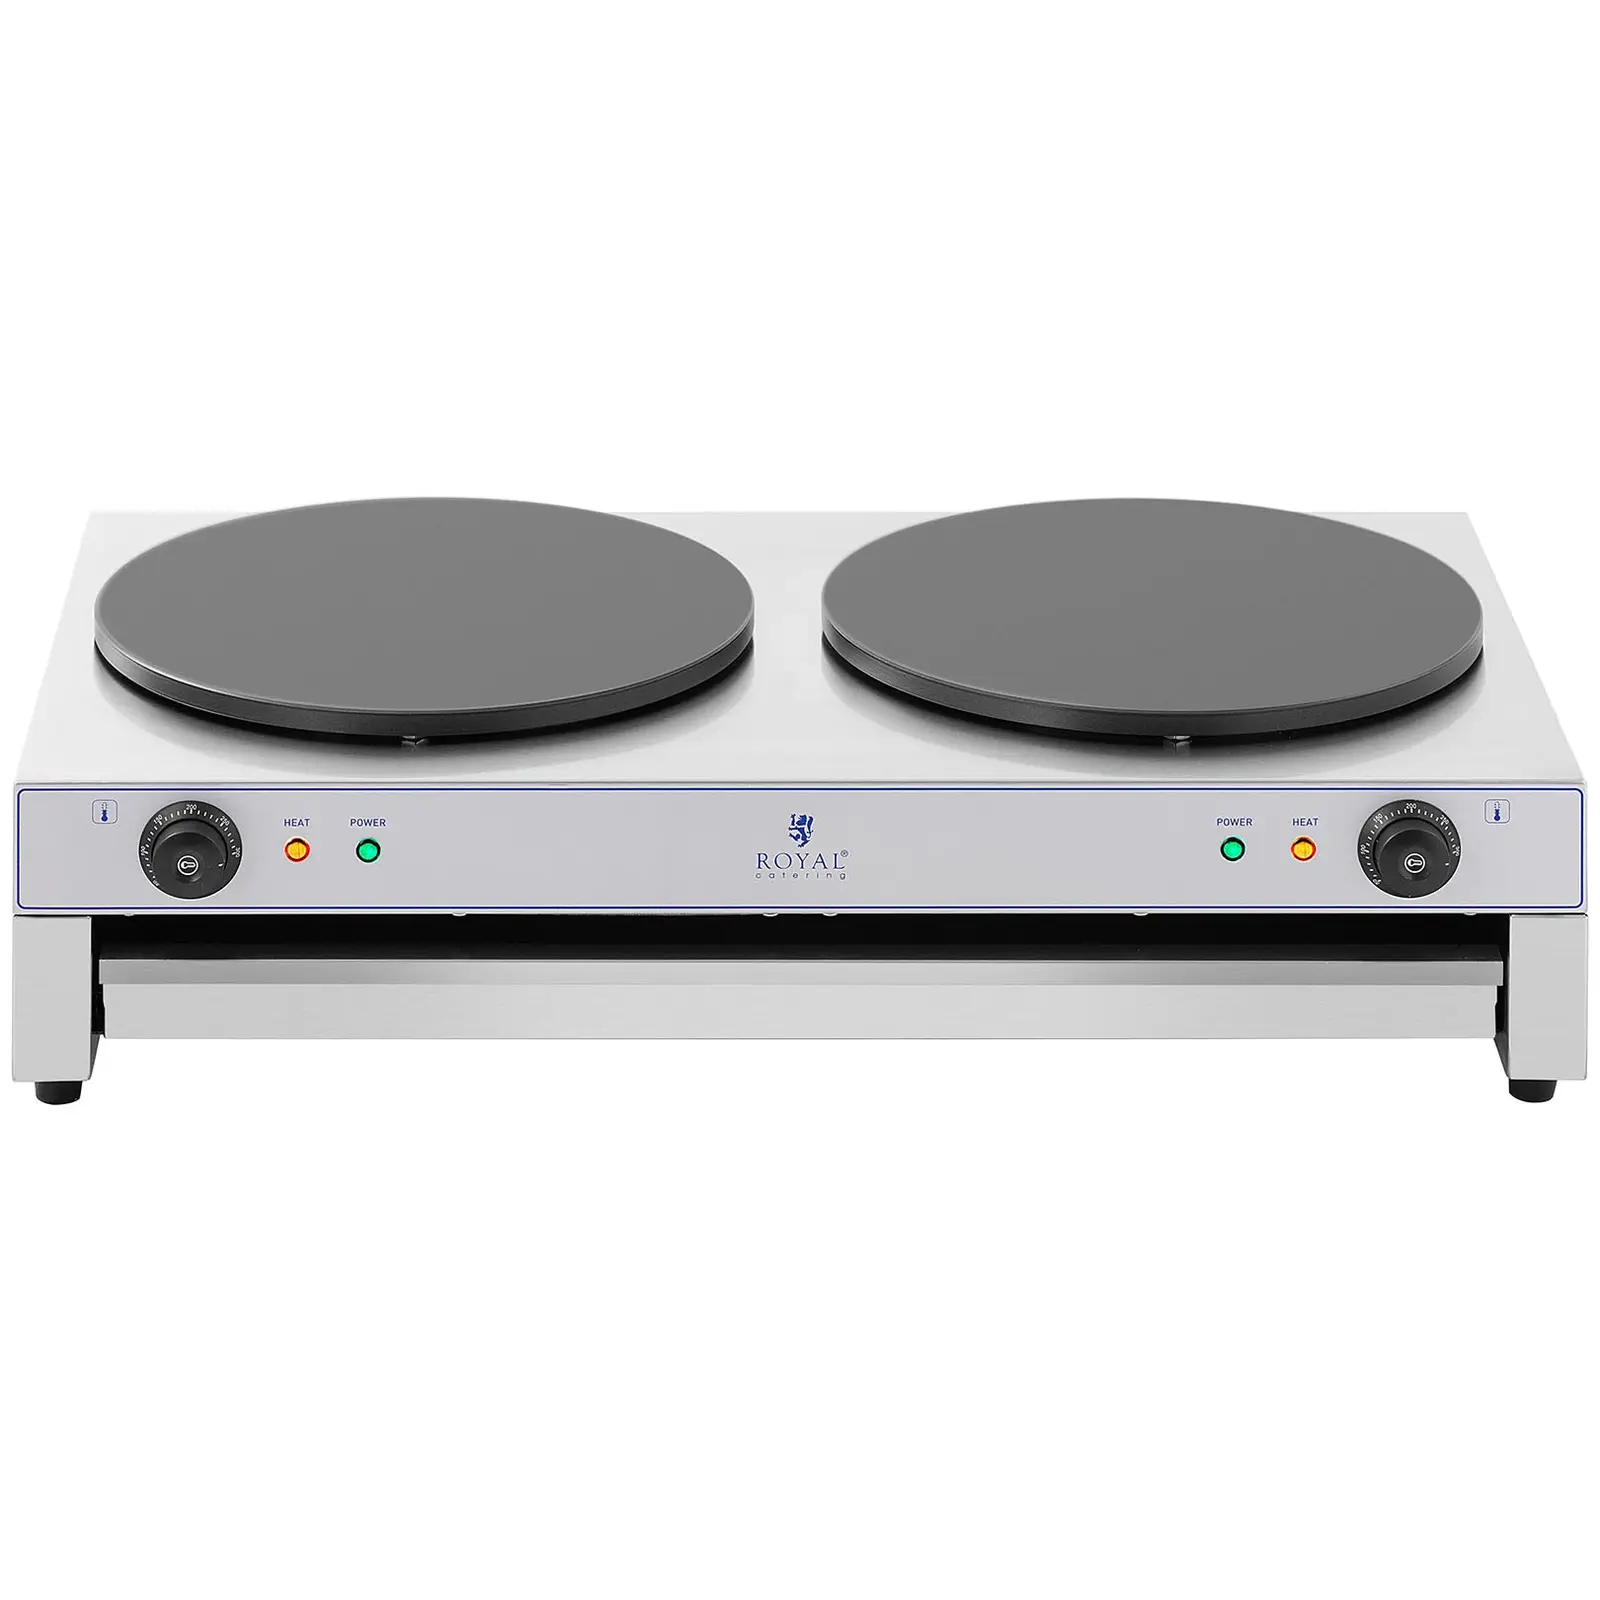 Crepera - 2 x Ø 400 mm - Royal Catering - 2 x 3,000 W - compartimento extraíble